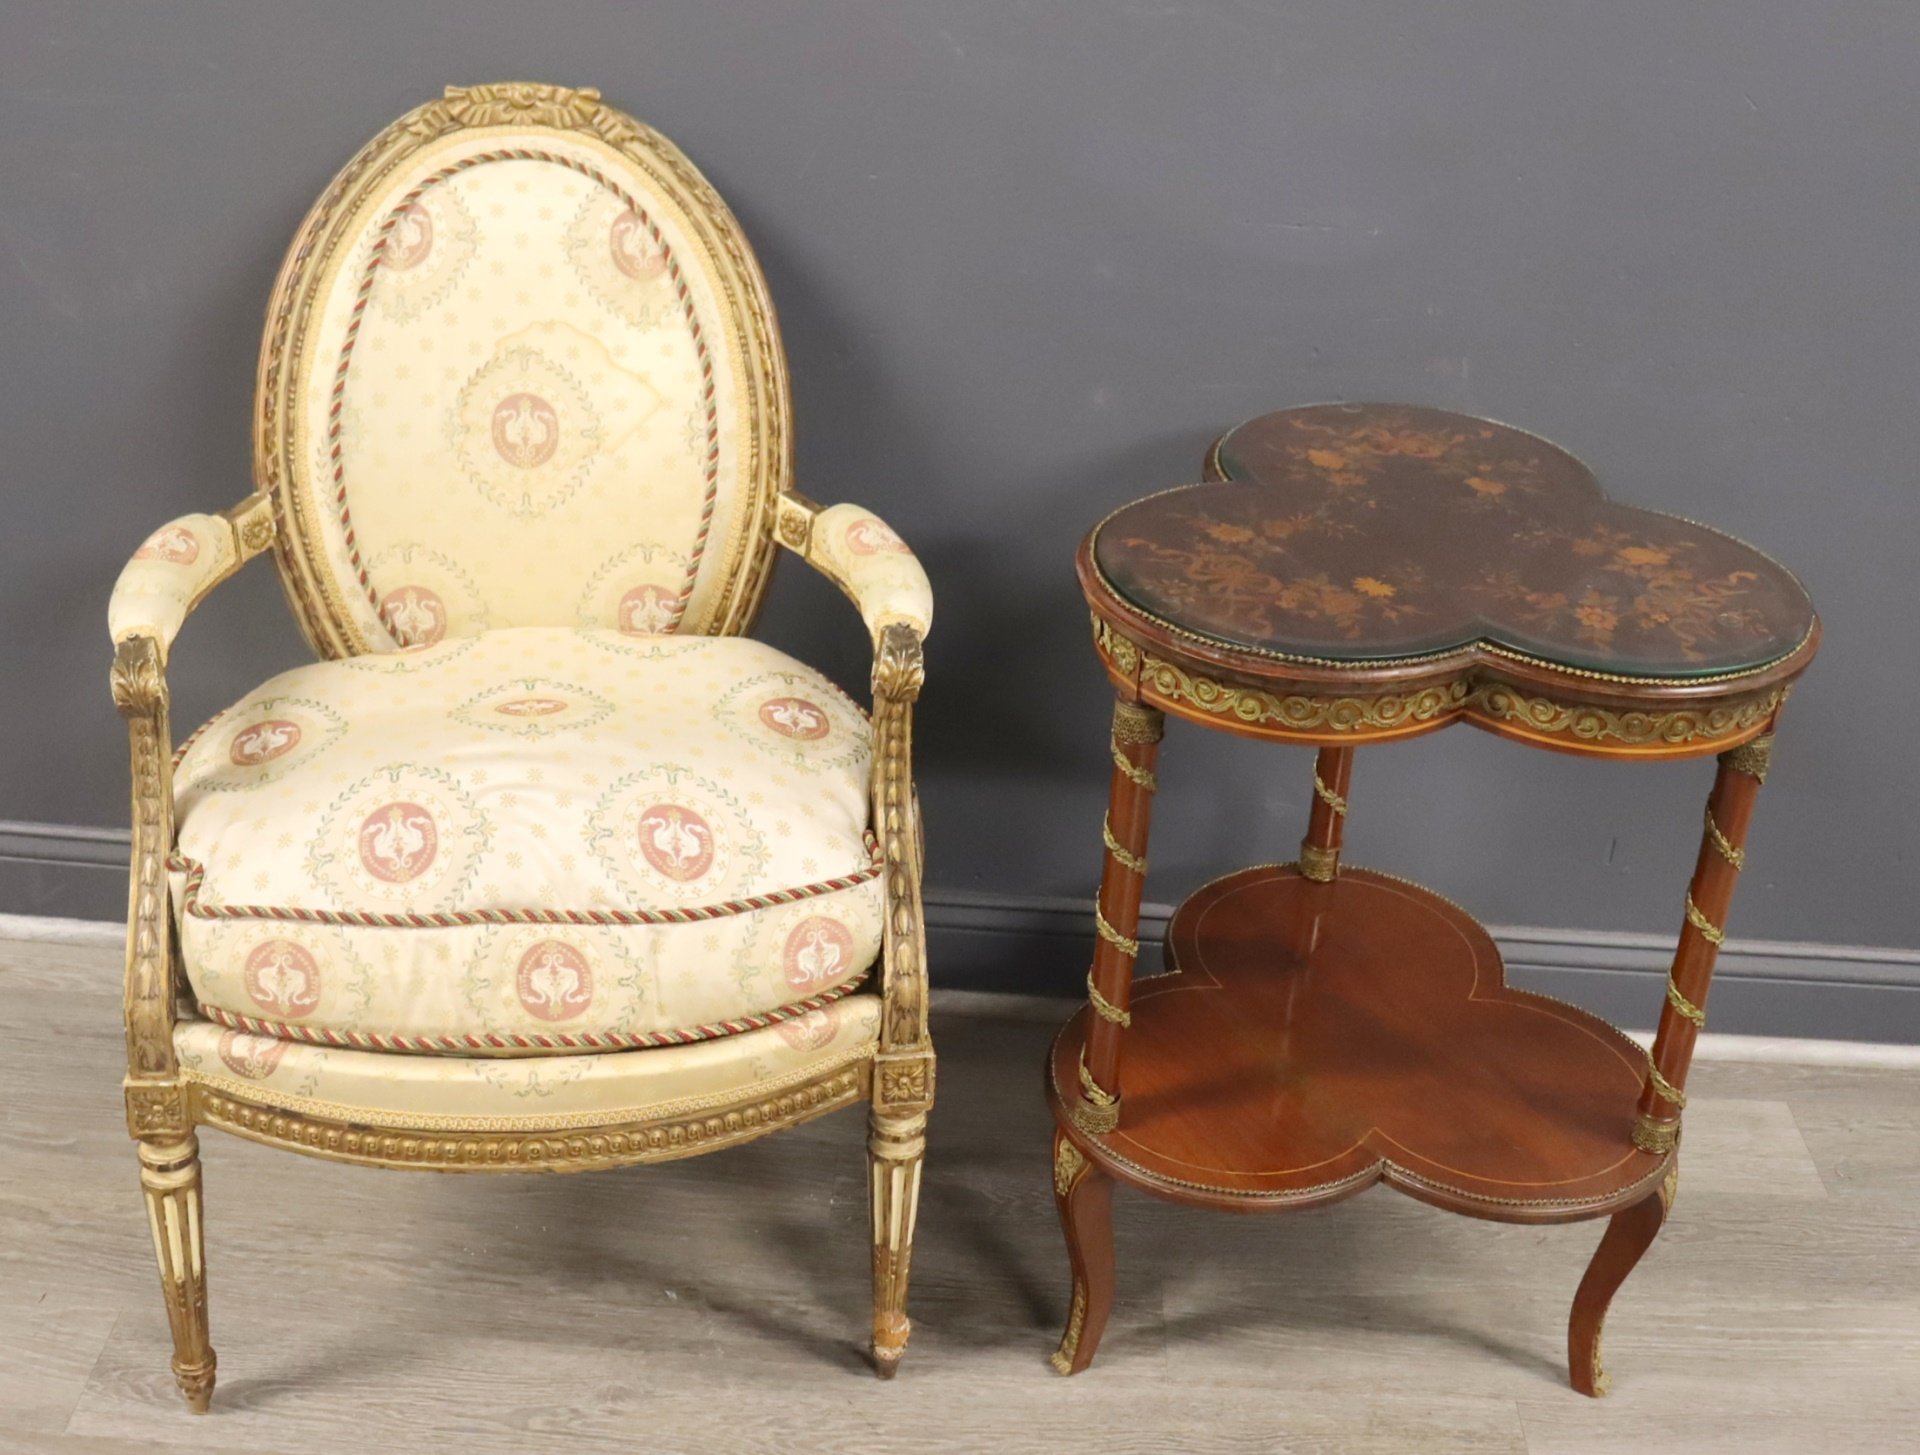 LOUIS XV1 STYLE CHAIR TOGETHER